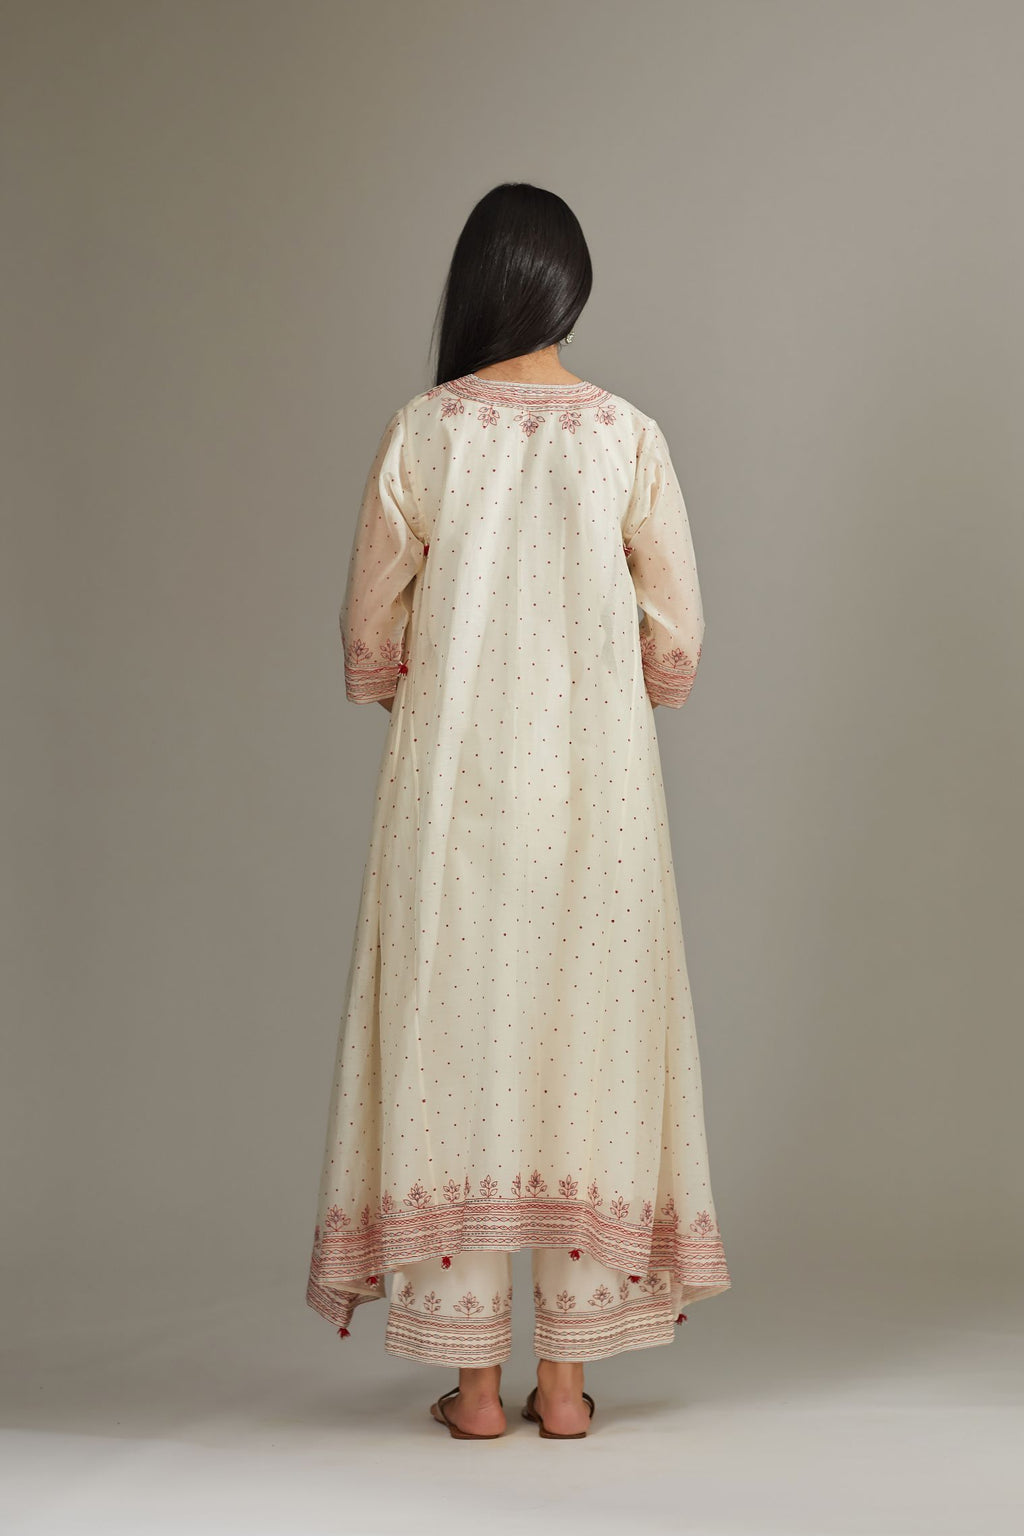 Asymmetric hand block printed kurta set with contrast quilted embroidery.